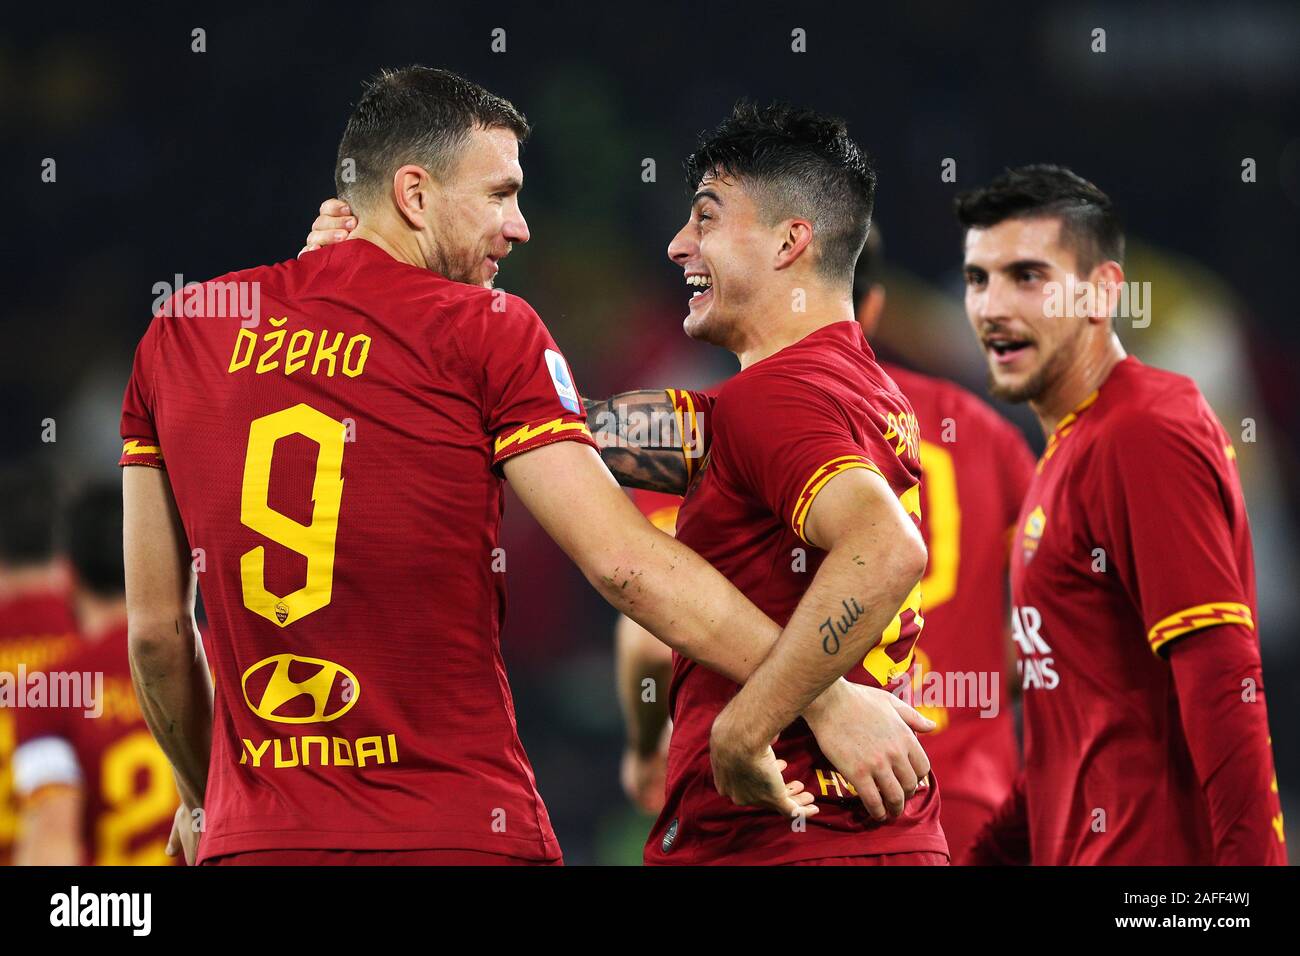 Diego Perotti R Of Roma Celebrates With Edin Dzeko L After Scoring 2 1 Goal During The Italian Championship Serie A Football Match Between As Roma And Spal 13 On December 15 19